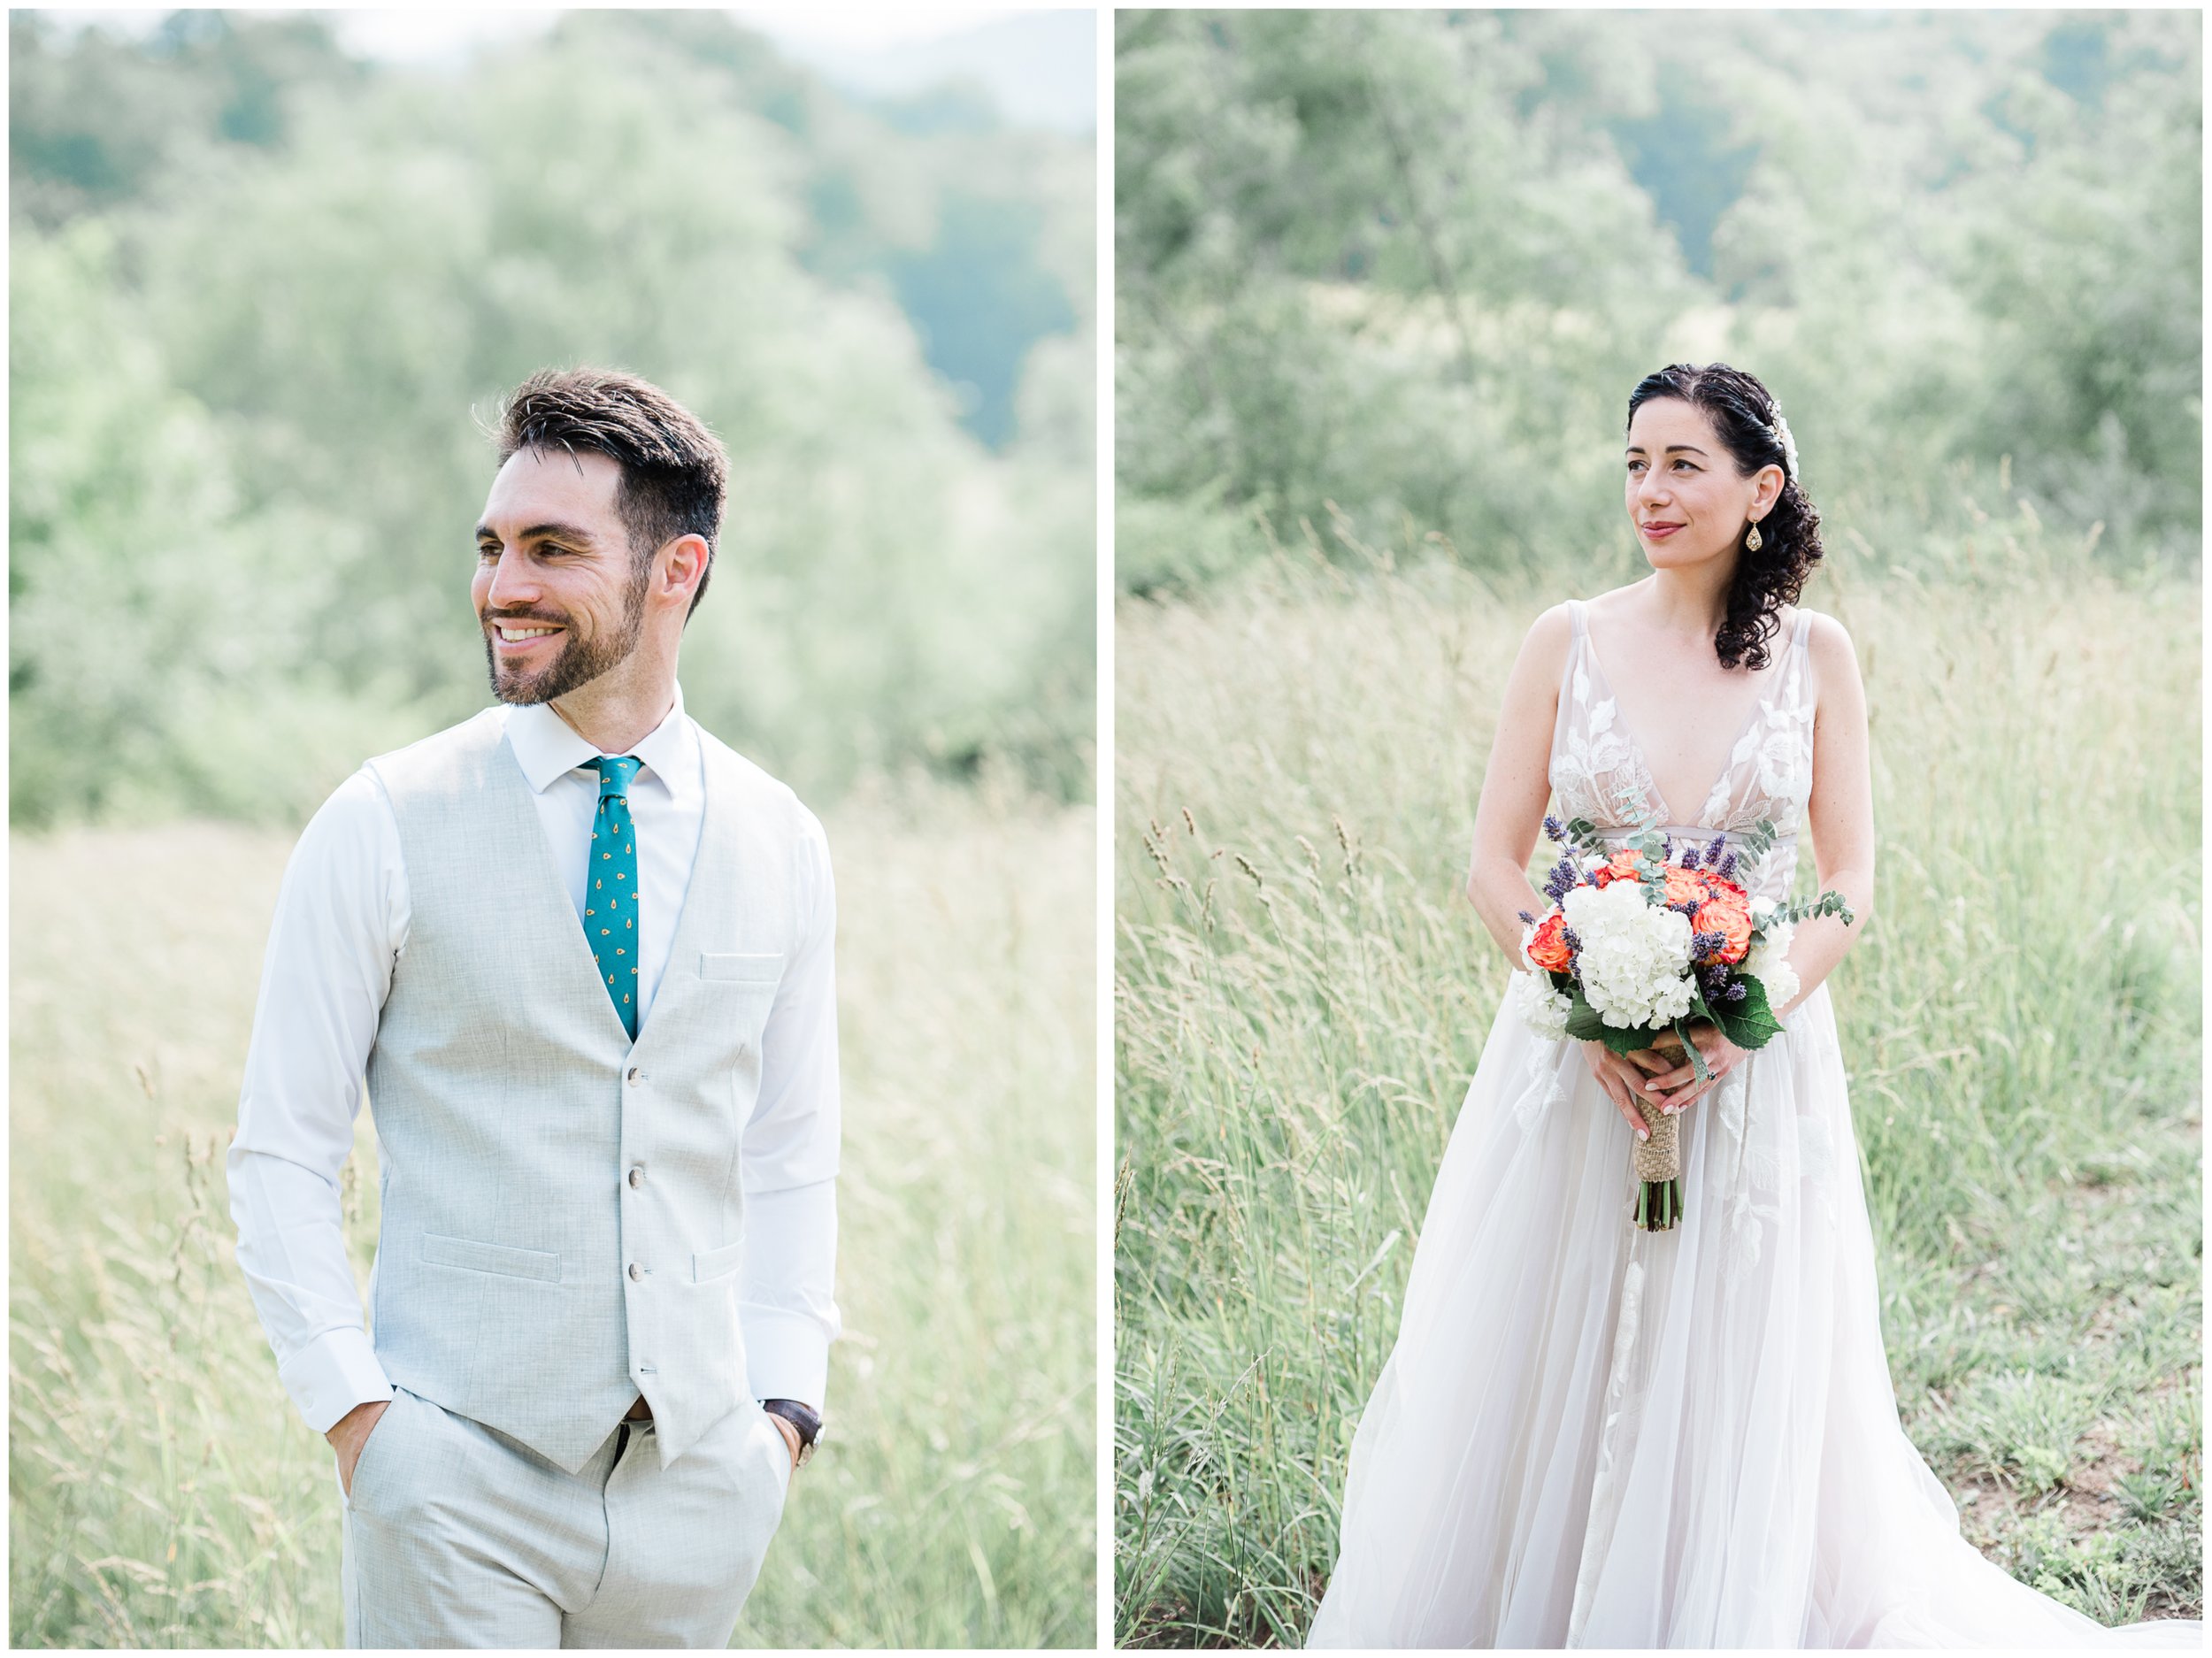 Bride and Groom Portraits, Mariah Fisher Photography.jpg